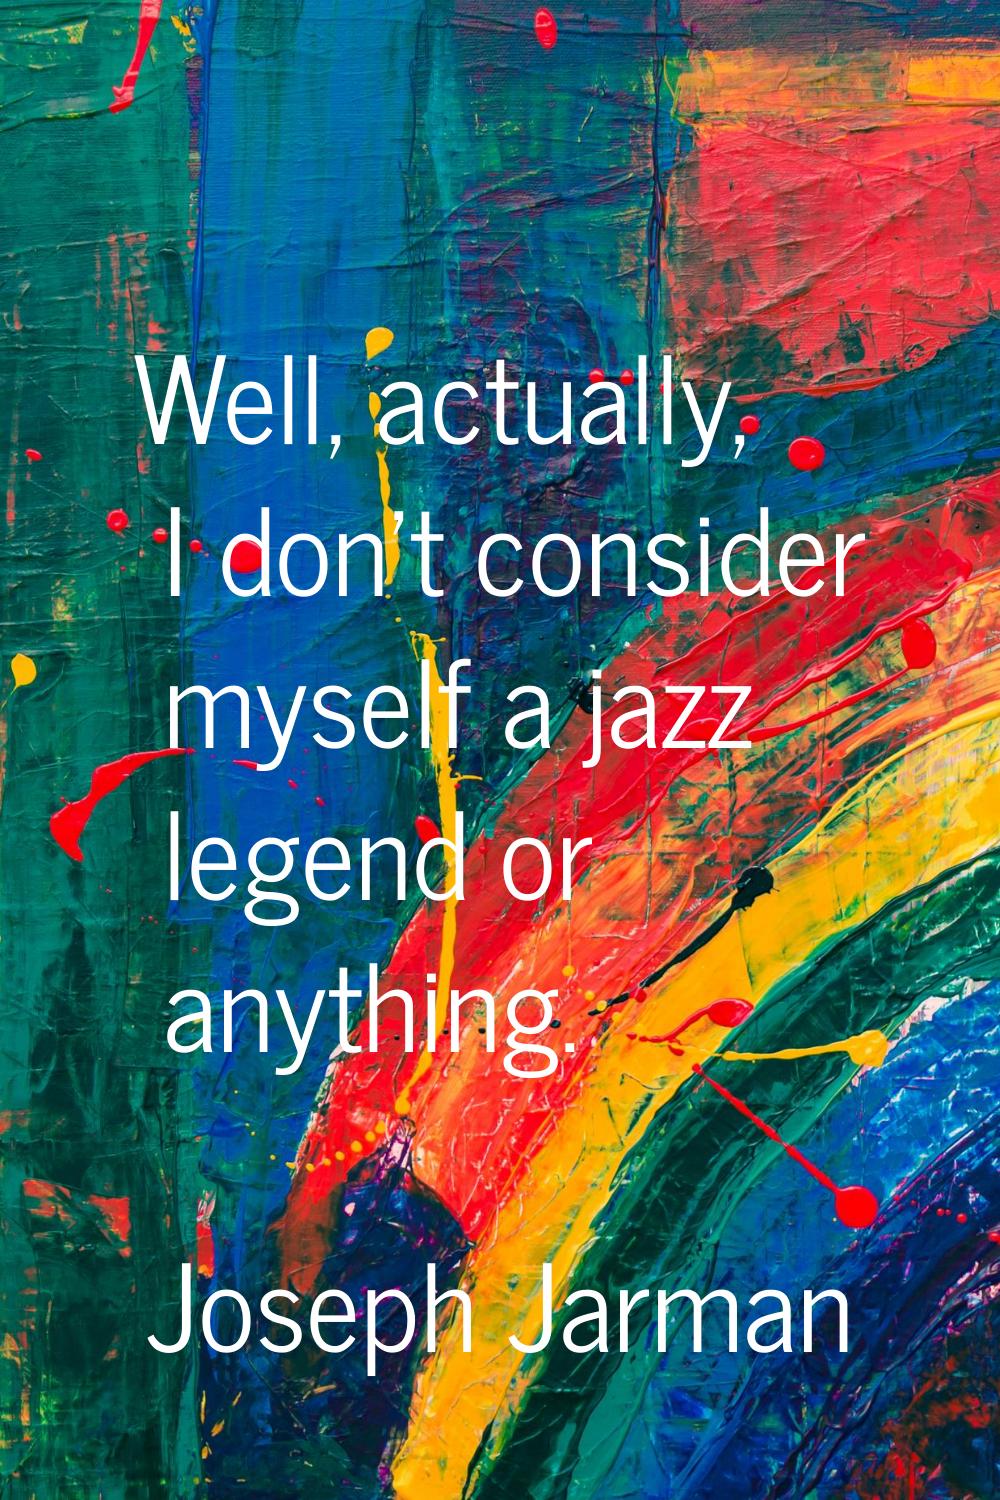 Well, actually, I don't consider myself a jazz legend or anything.